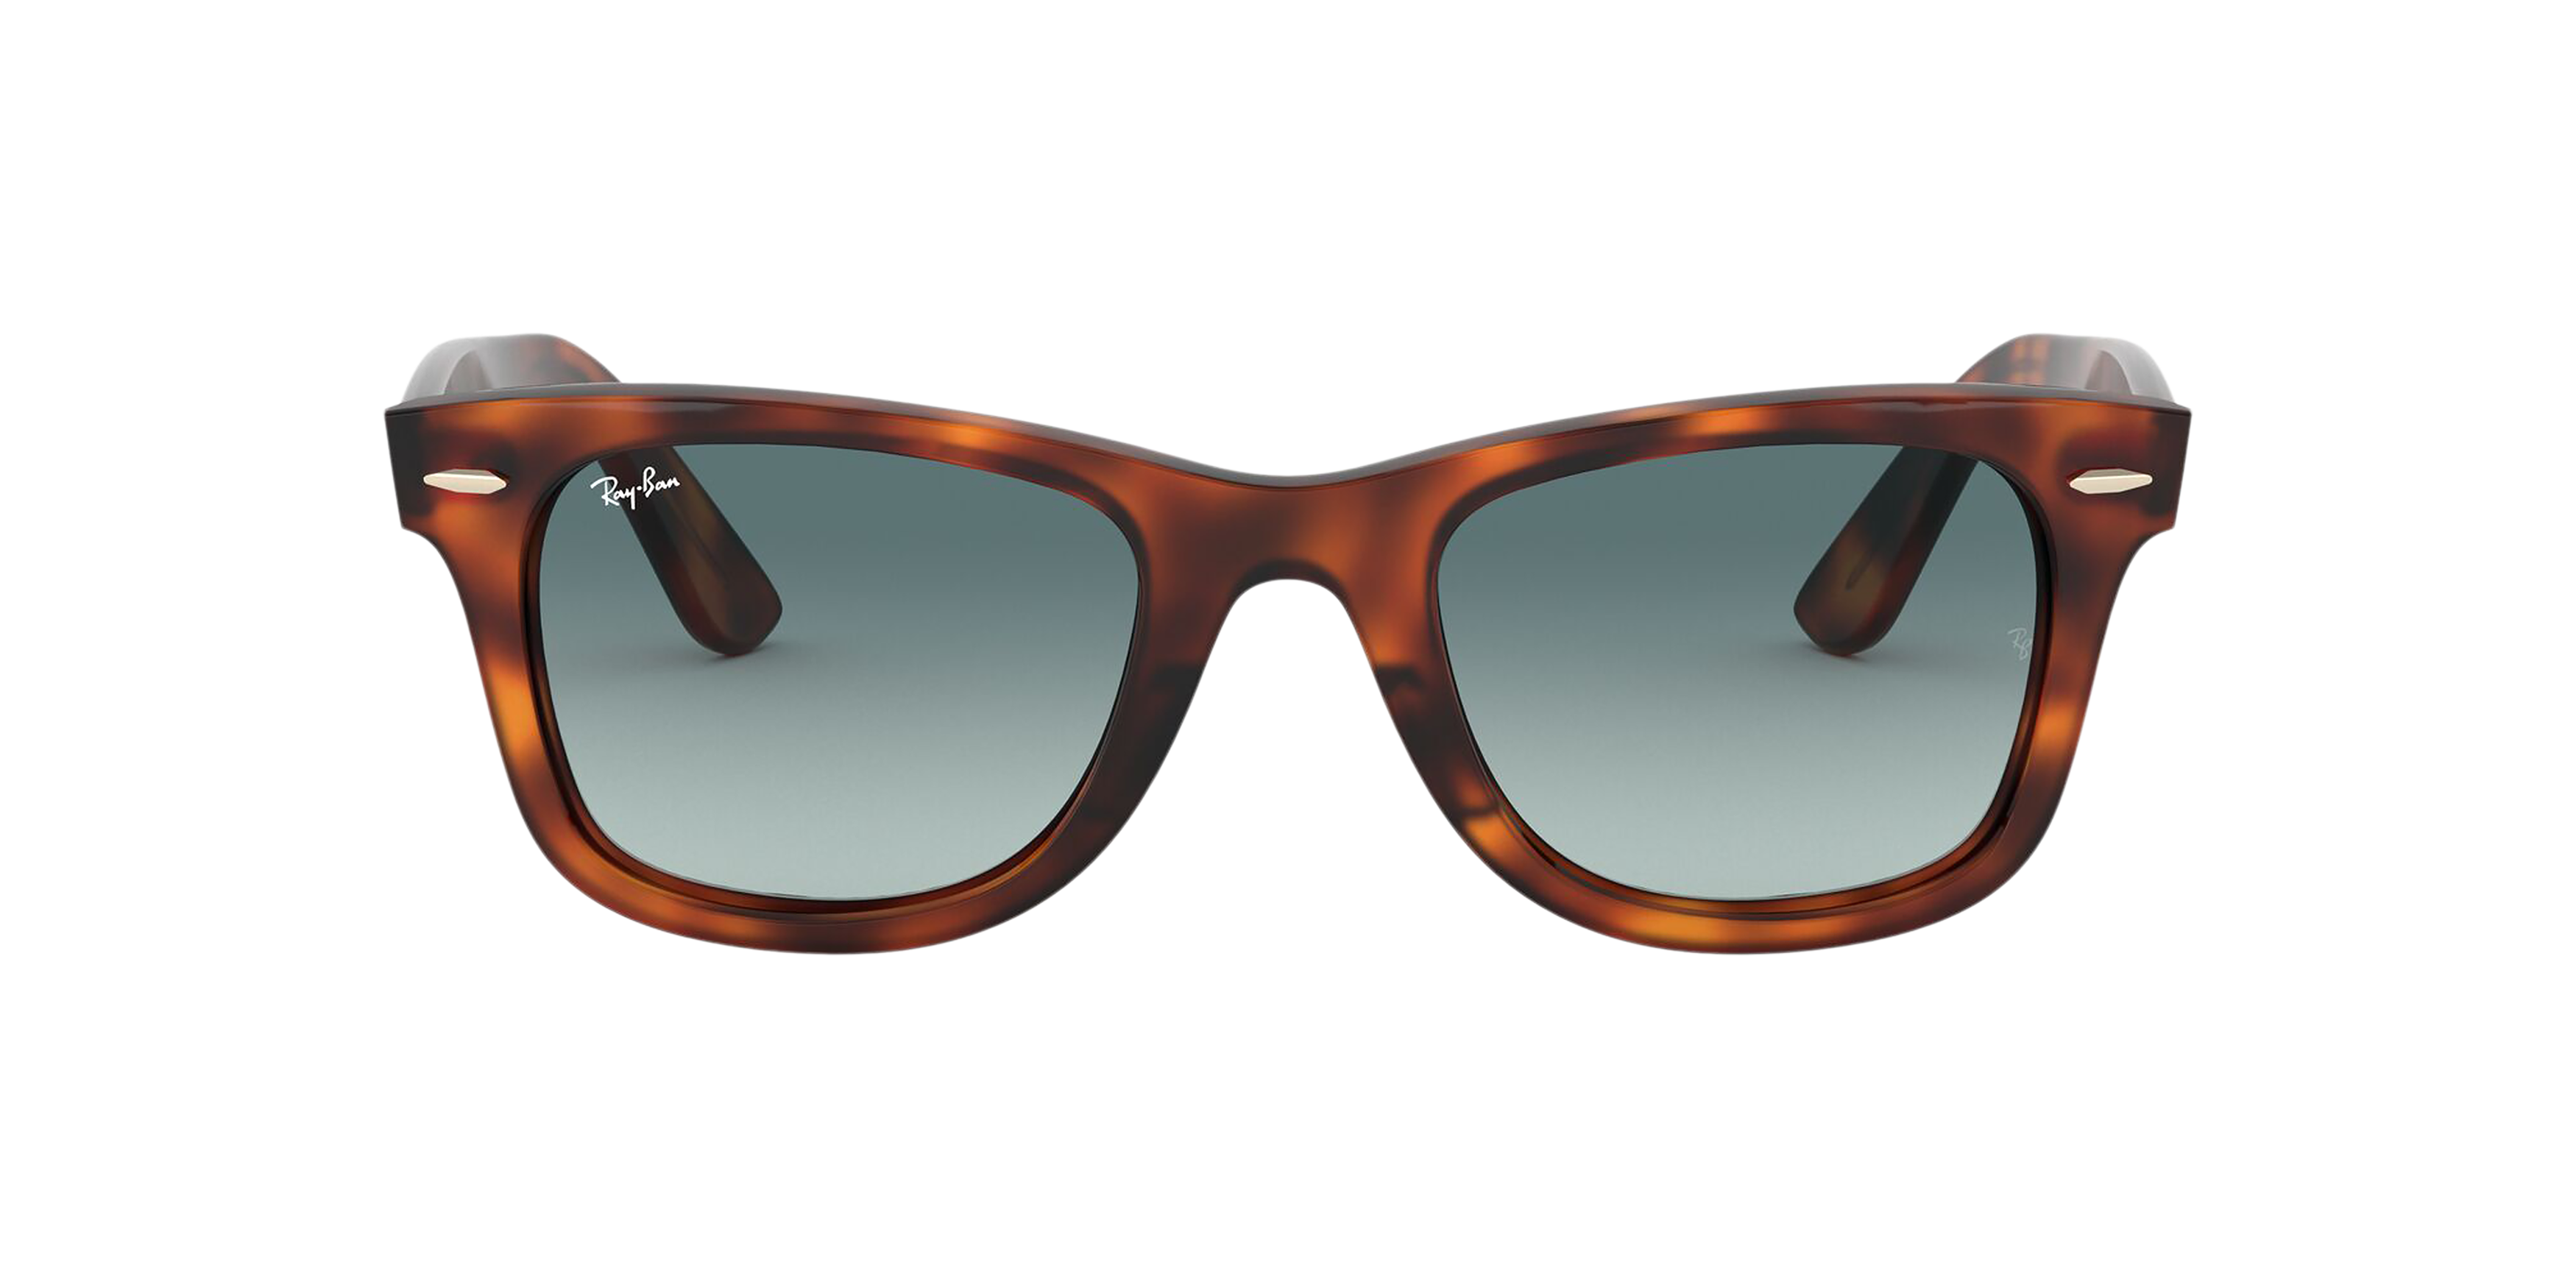 [products.image.front] Ray-Ban Wayfarer Ease RB4340 63973M